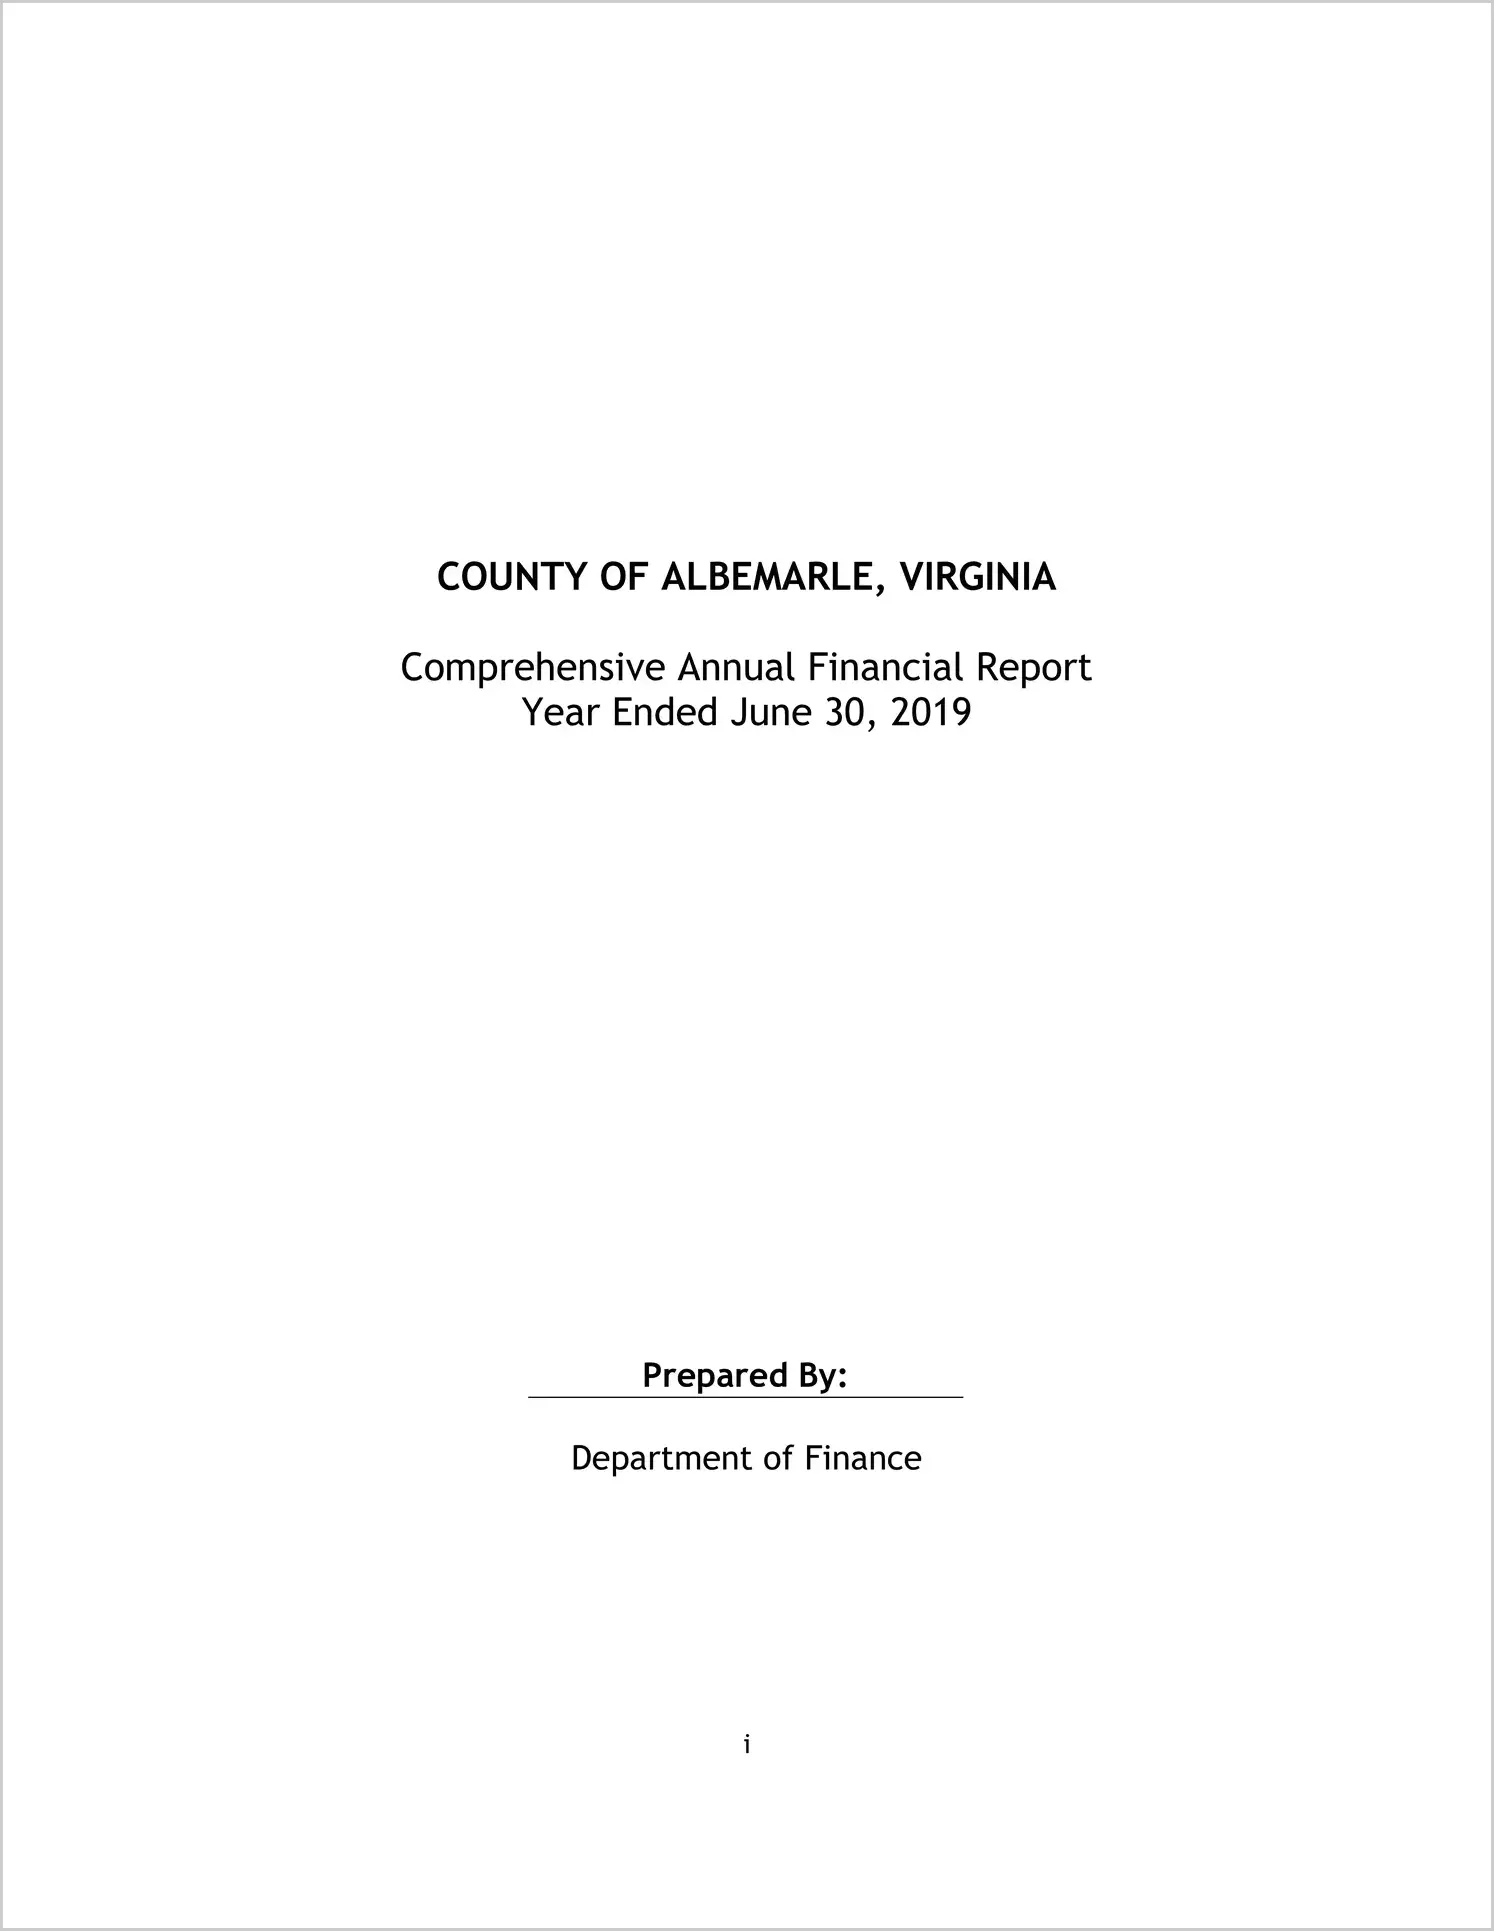 2019 Annual Financial Report for County of Albemarle